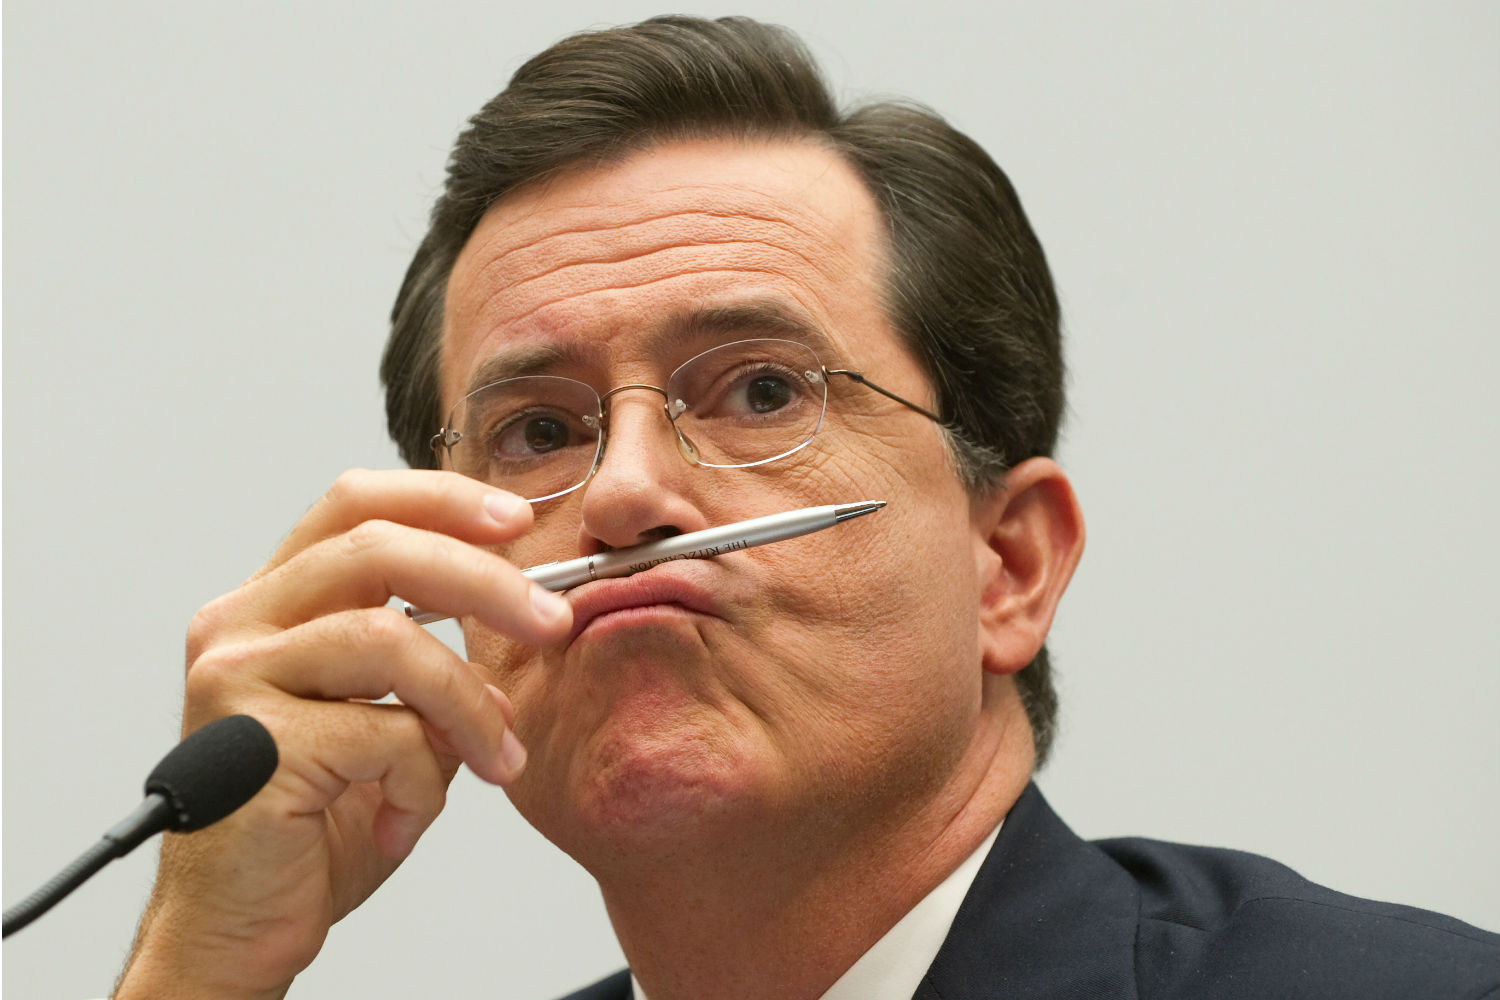 How psyched is Stephen Colbert and his "Colbert Report" writing team about legalized marijuana sales in Colorado? Very. (Saul Loeb, AFP/Getty)